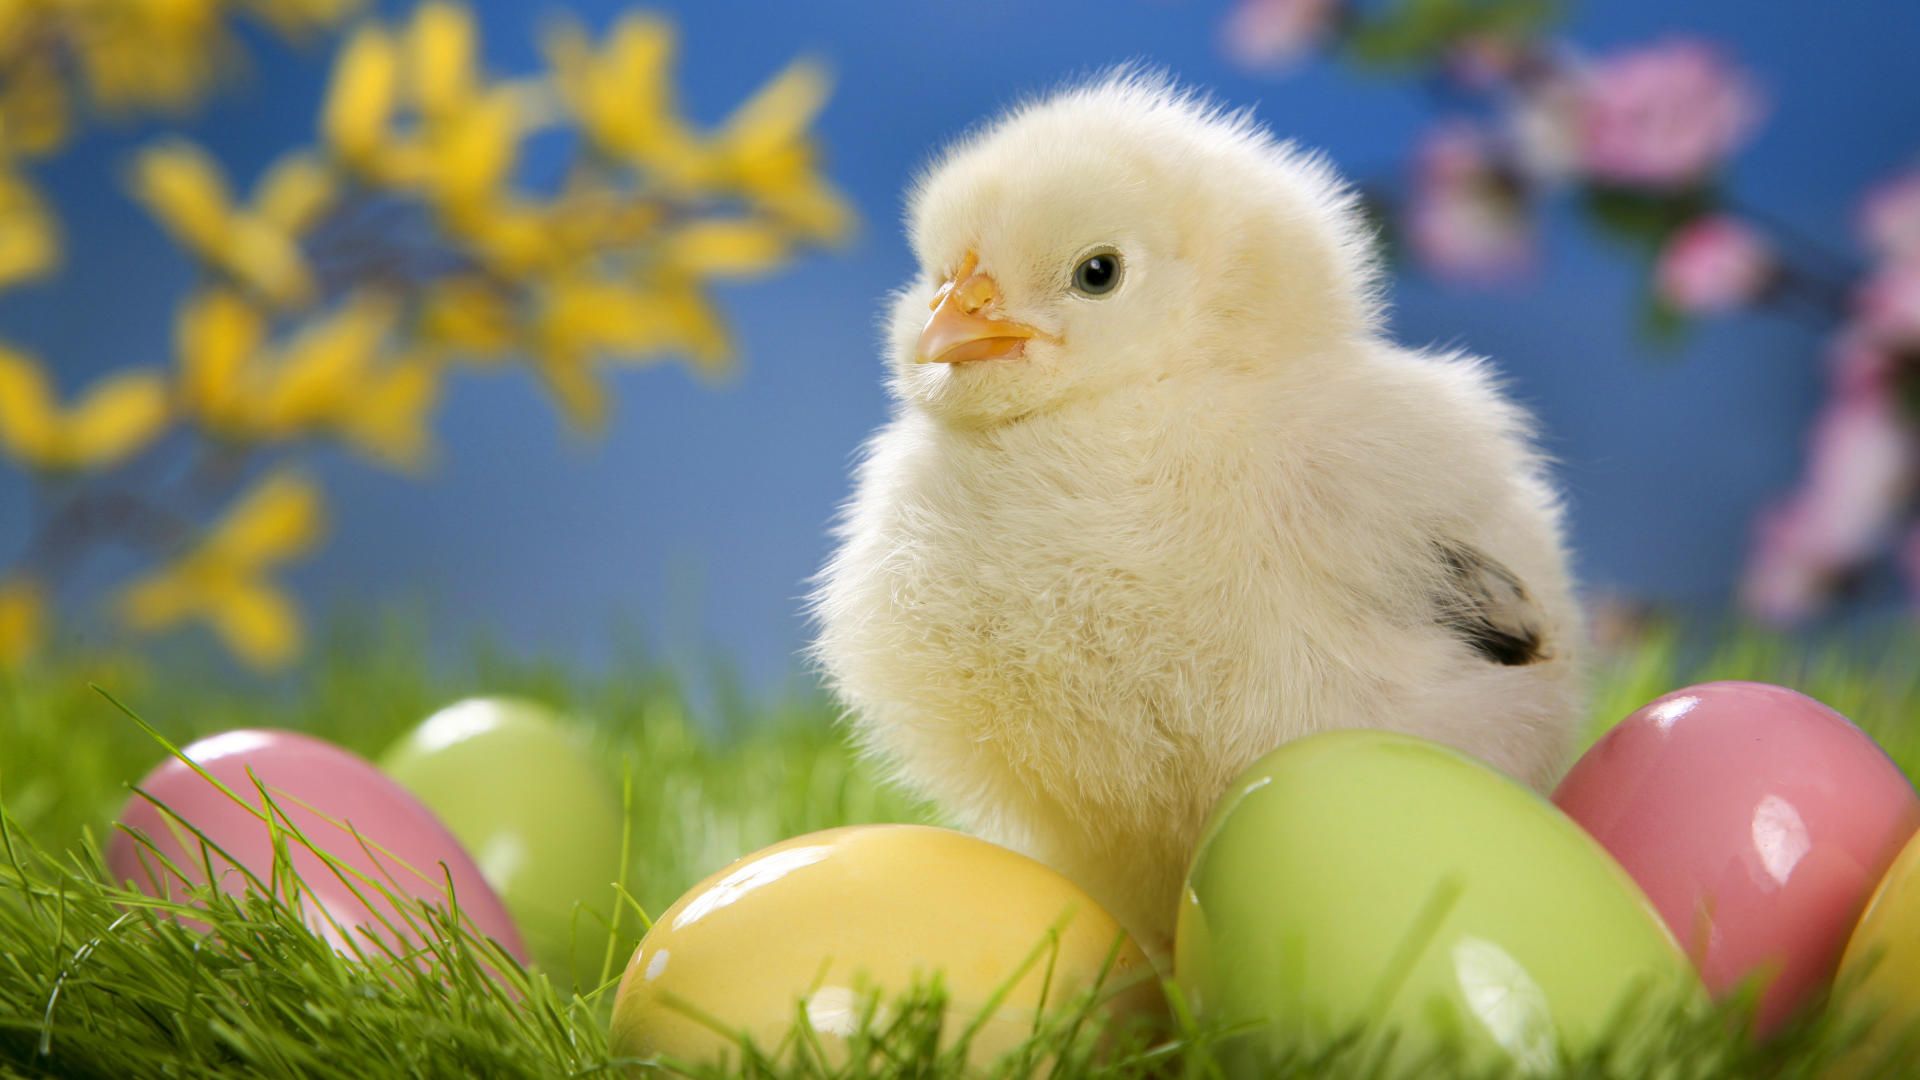 BEAUTIFUL EASTER WALLPAPER FREE TO DOWNLOAD